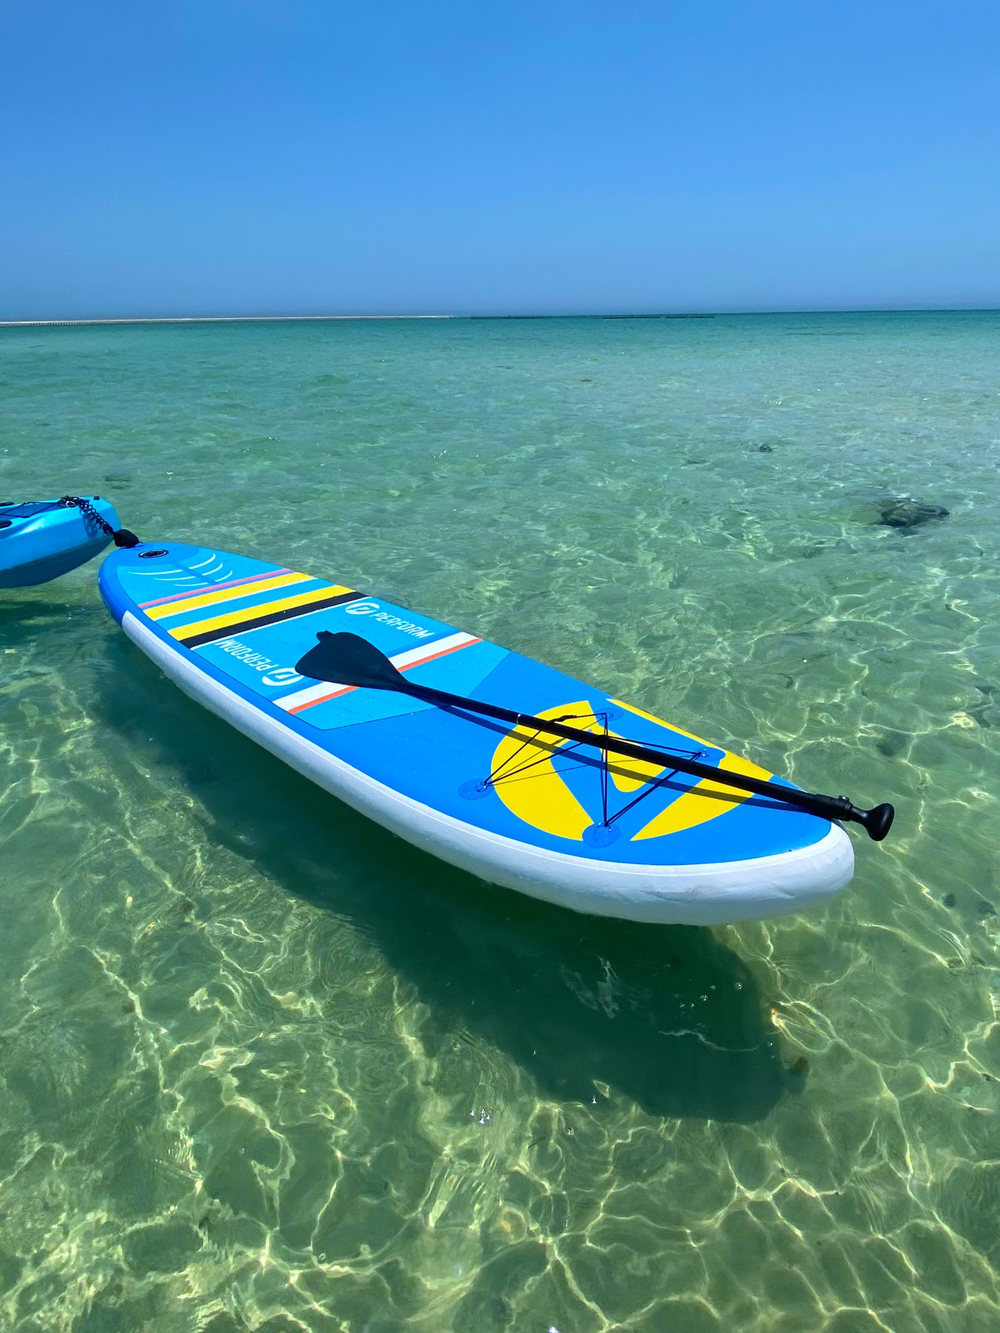 MSL PADDLE BOARD - Limited Edition - Perform Athletics